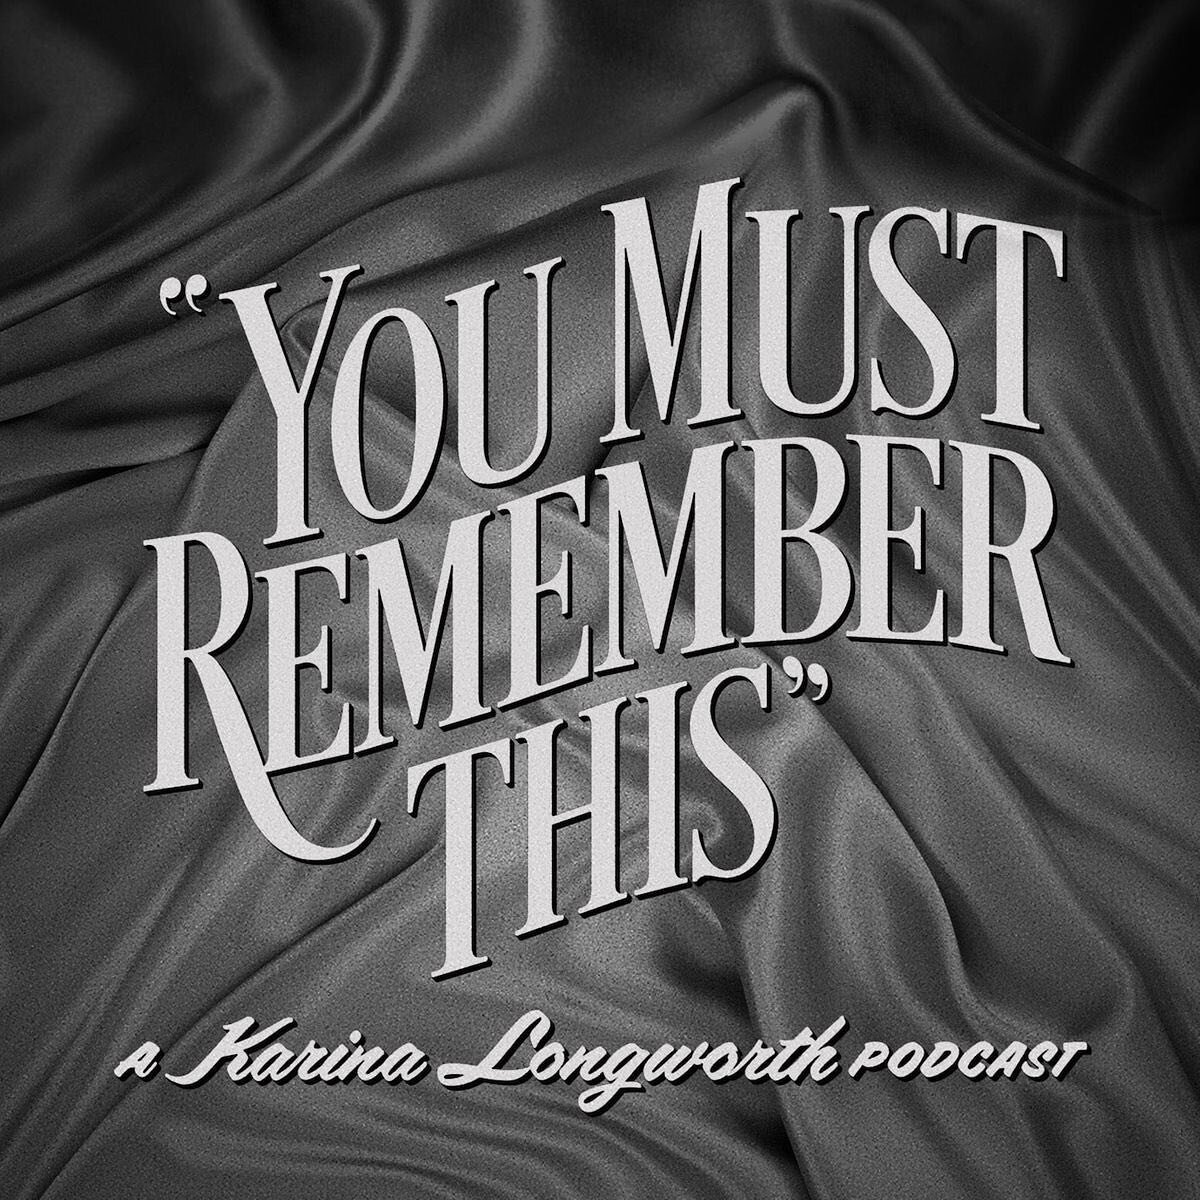 There was no shortage of incredible podcasts this year, but the @youmustrememberthis ten-part series on Polly Platt (&ldquo;Polly Platt, The Invisible Woman&rdquo;) is easily my favorite and the one I&rsquo;m still thinking about.
.
Platt is best kno